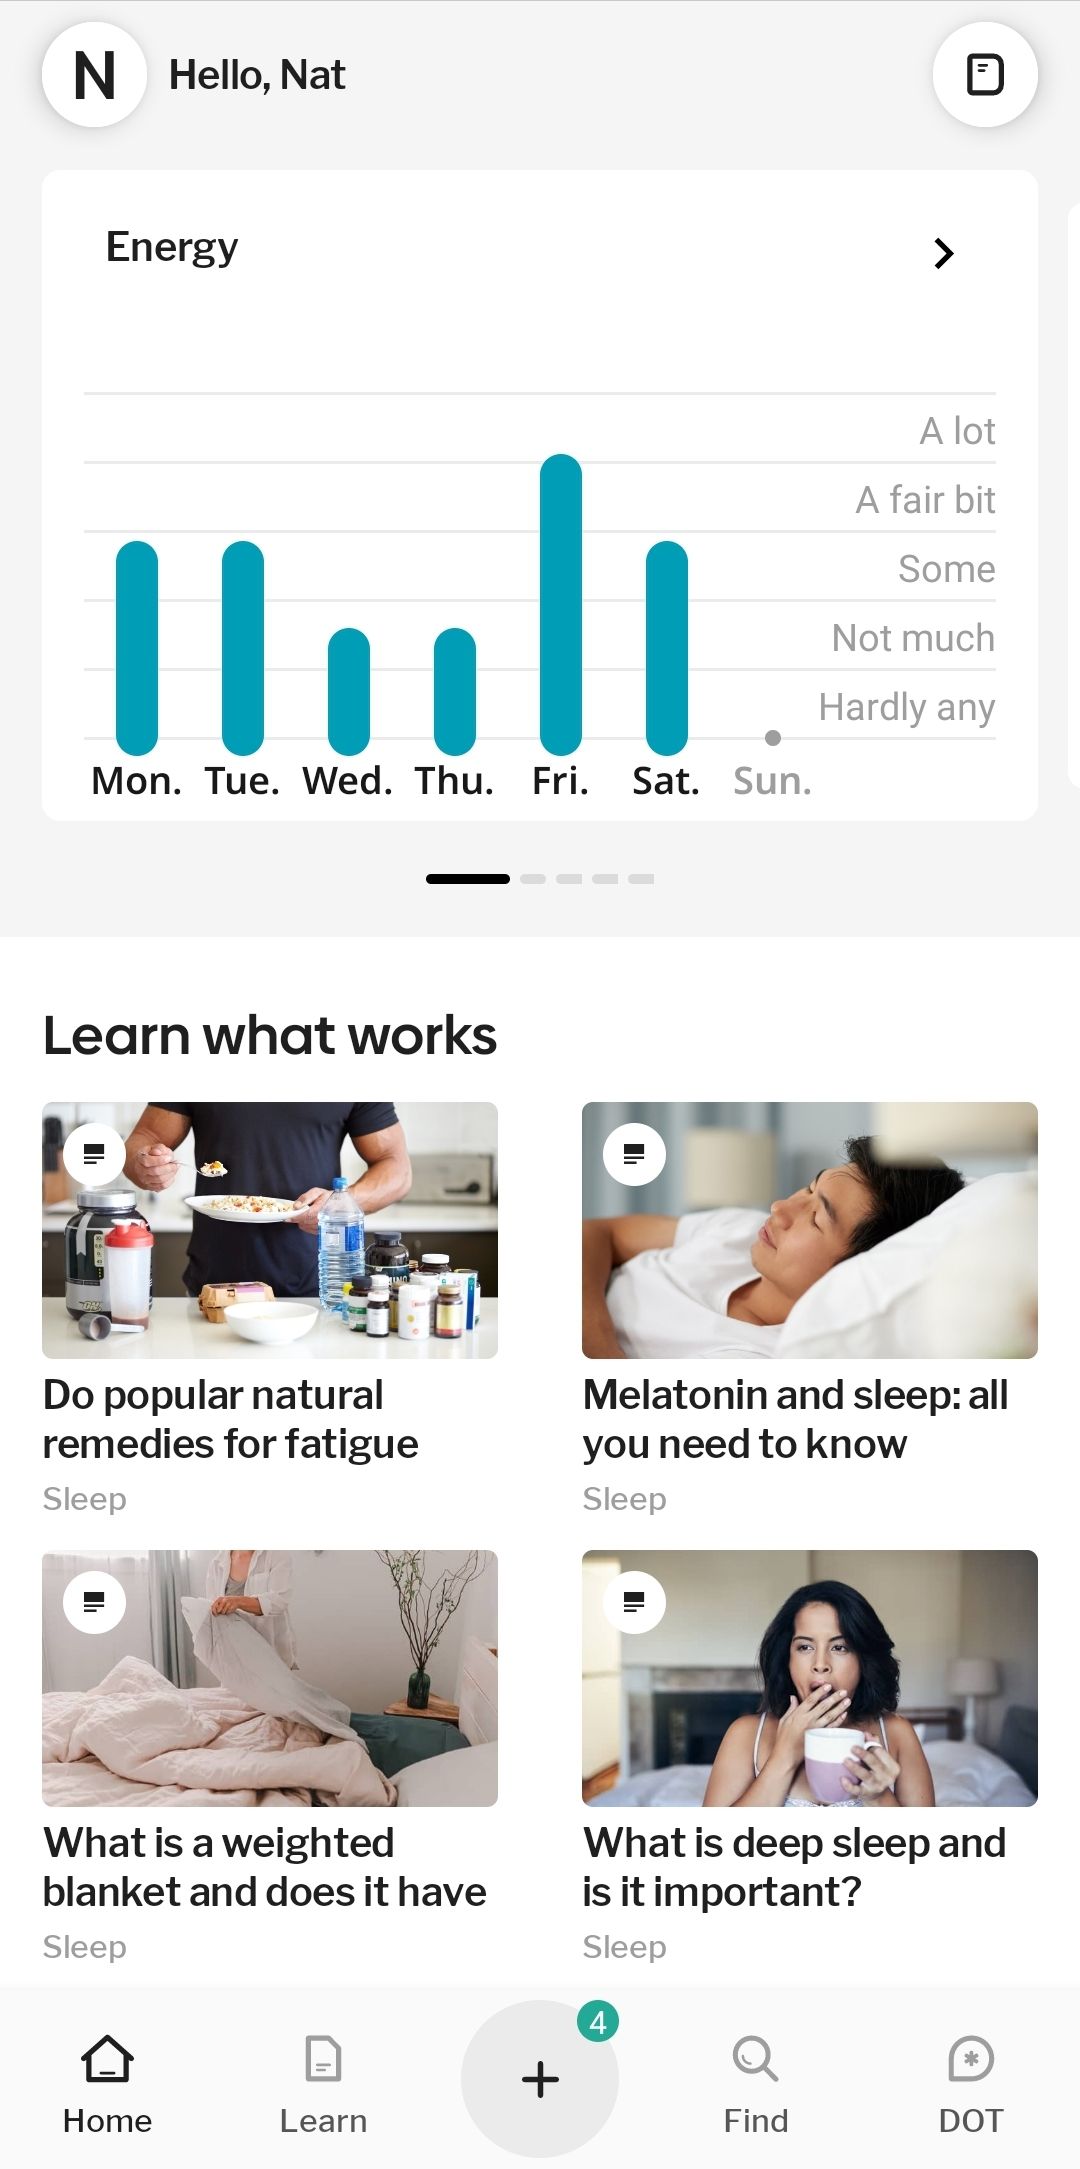 Healthily's home page showing trends in energy levels and some suggested reading